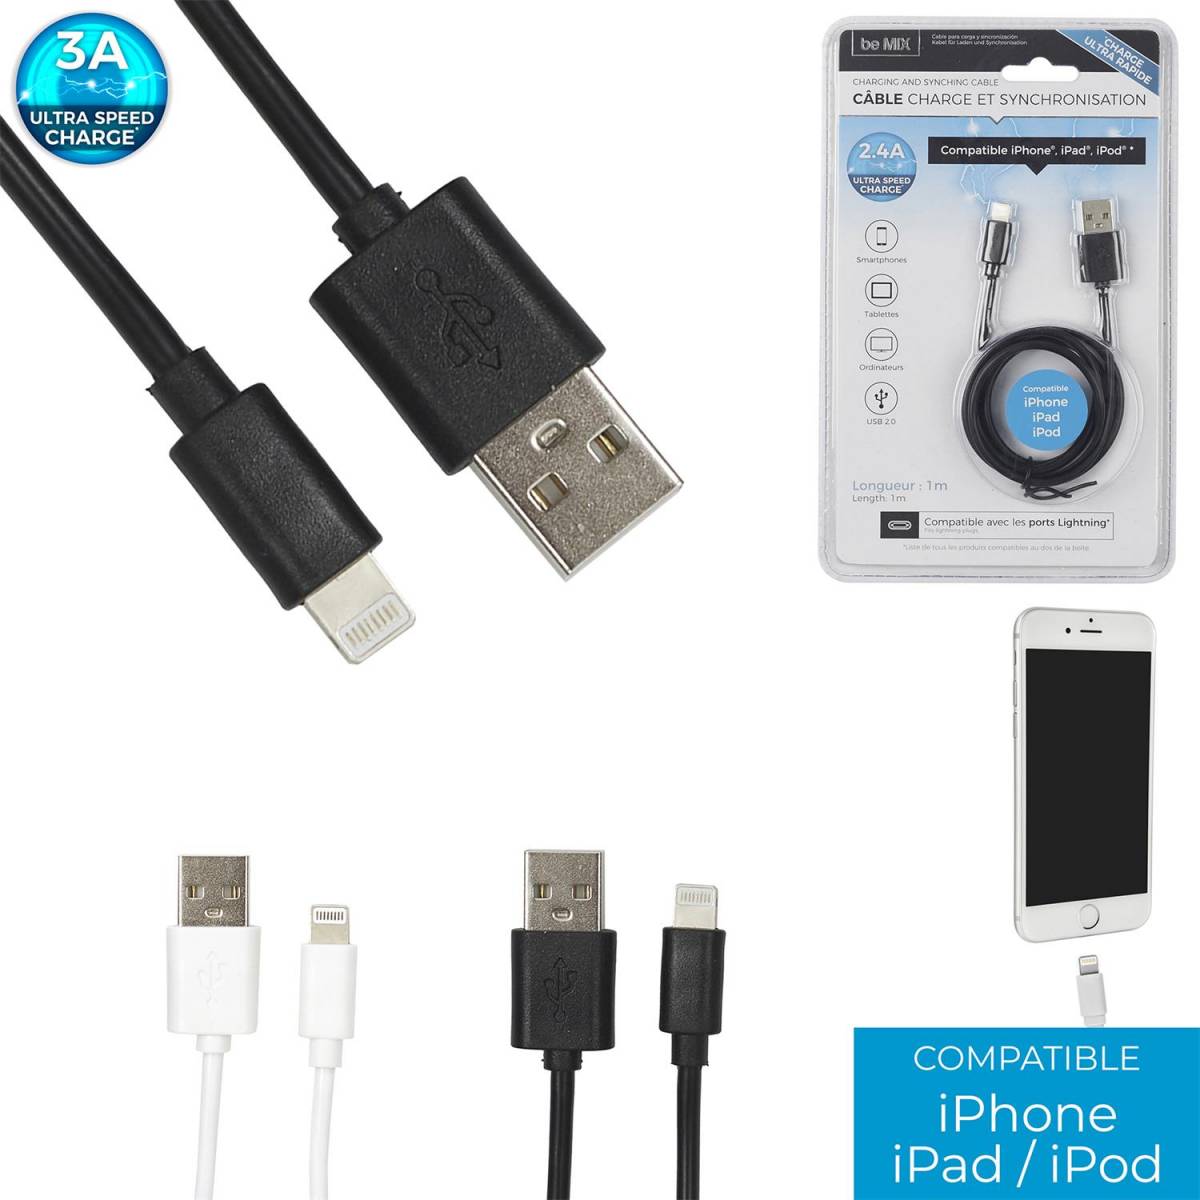 Cable Iphone Charge Ultra Rapide 2.4A Lightning BE MIX - MaxxiDiscount